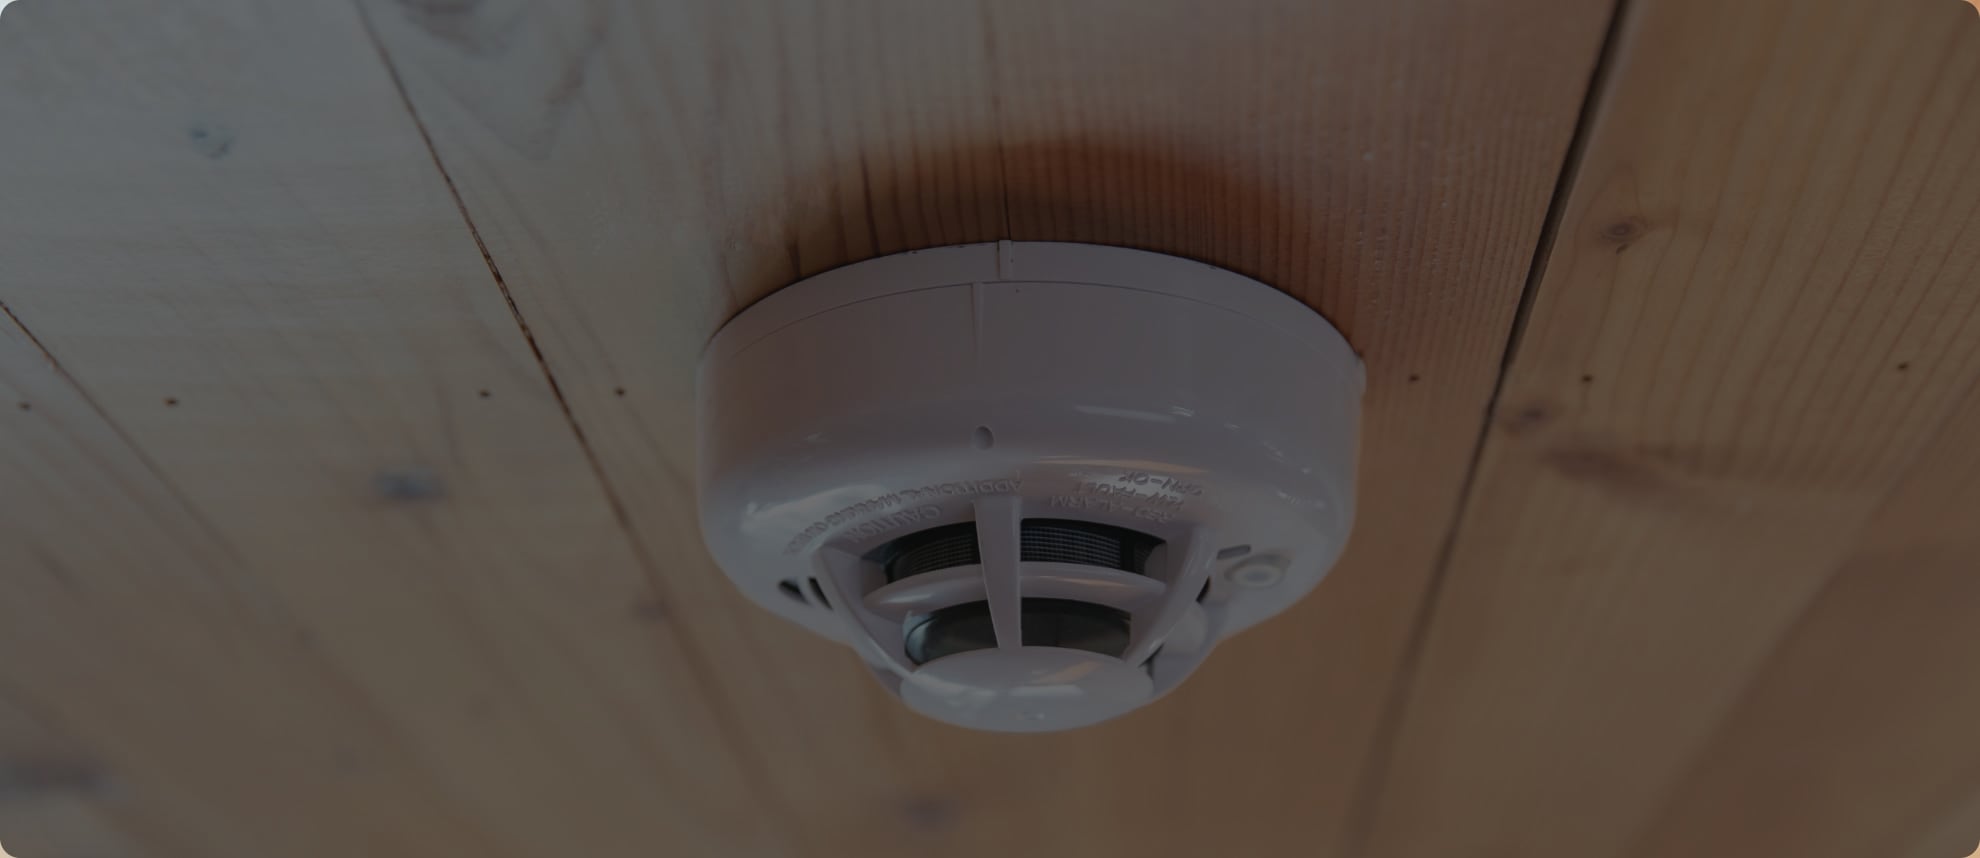 Vivint Monitored Smoke Alarm in Cleveland